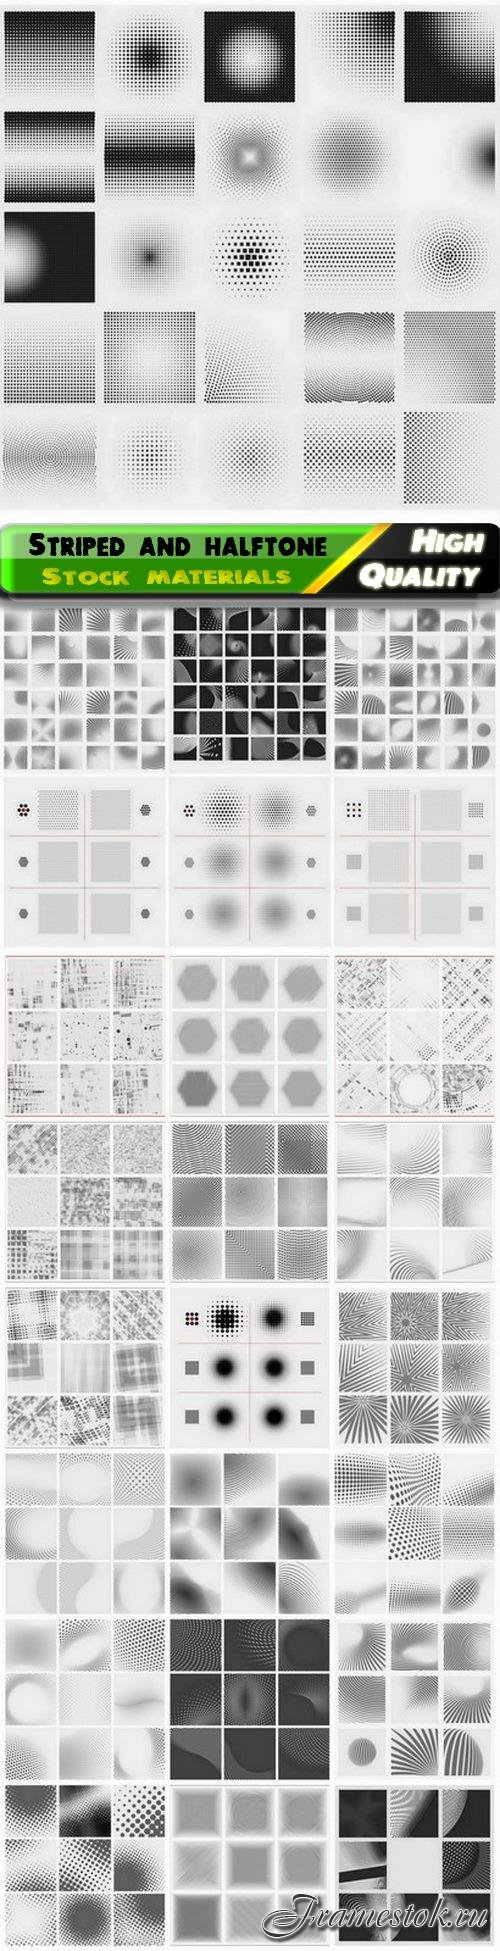 Grunge striped and halftone abstract forms and background - 25 Eps